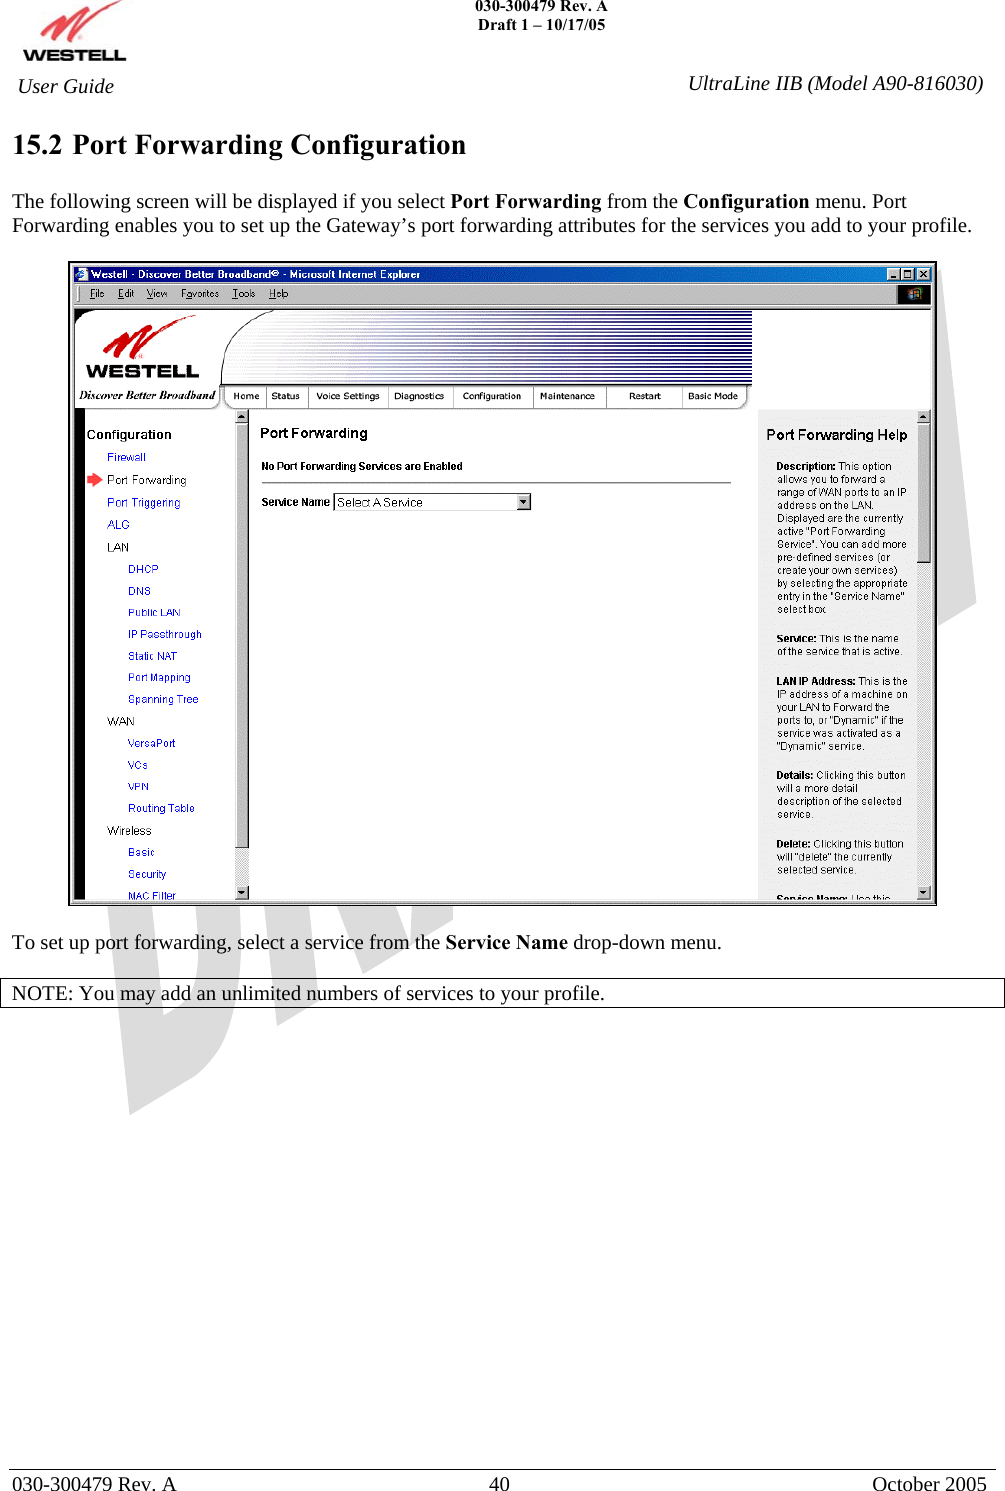    030-300479 Rev. A Draft 1 – 10/17/05   030-300479 Rev. A  40  October 2005  User Guide  UltraLine IIB (Model A90-816030)15.2 Port Forwarding Configuration  The following screen will be displayed if you select Port Forwarding from the Configuration menu. Port Forwarding enables you to set up the Gateway’s port forwarding attributes for the services you add to your profile.    To set up port forwarding, select a service from the Service Name drop-down menu.  NOTE: You may add an unlimited numbers of services to your profile.  